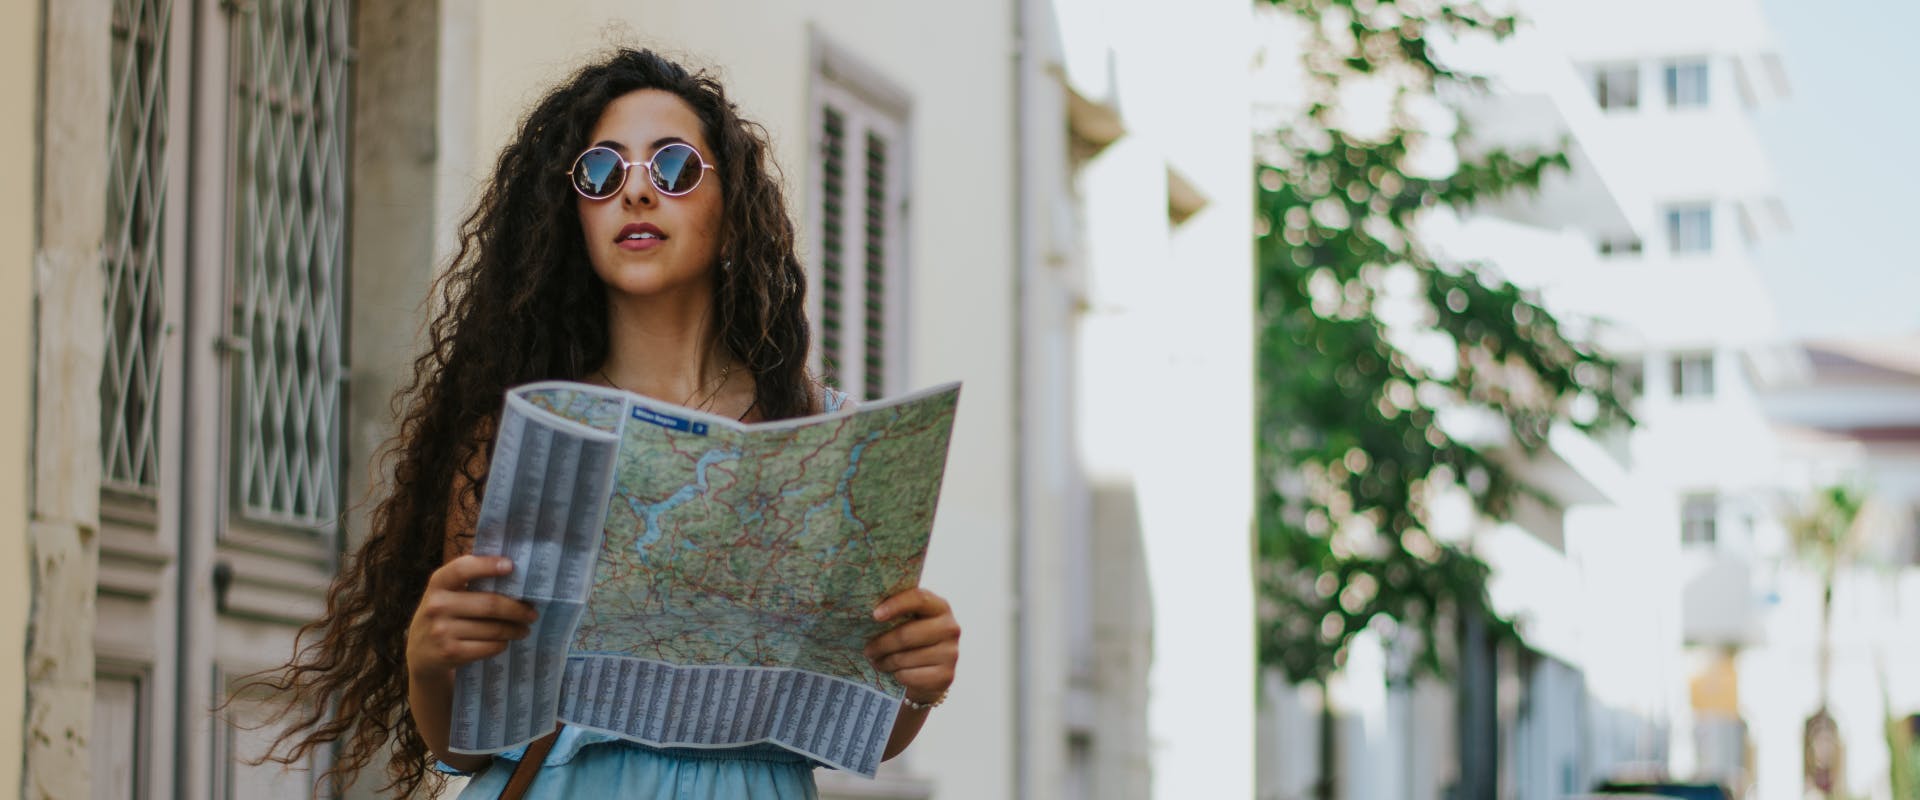 A woman reading a map on her solo trip to Spain.